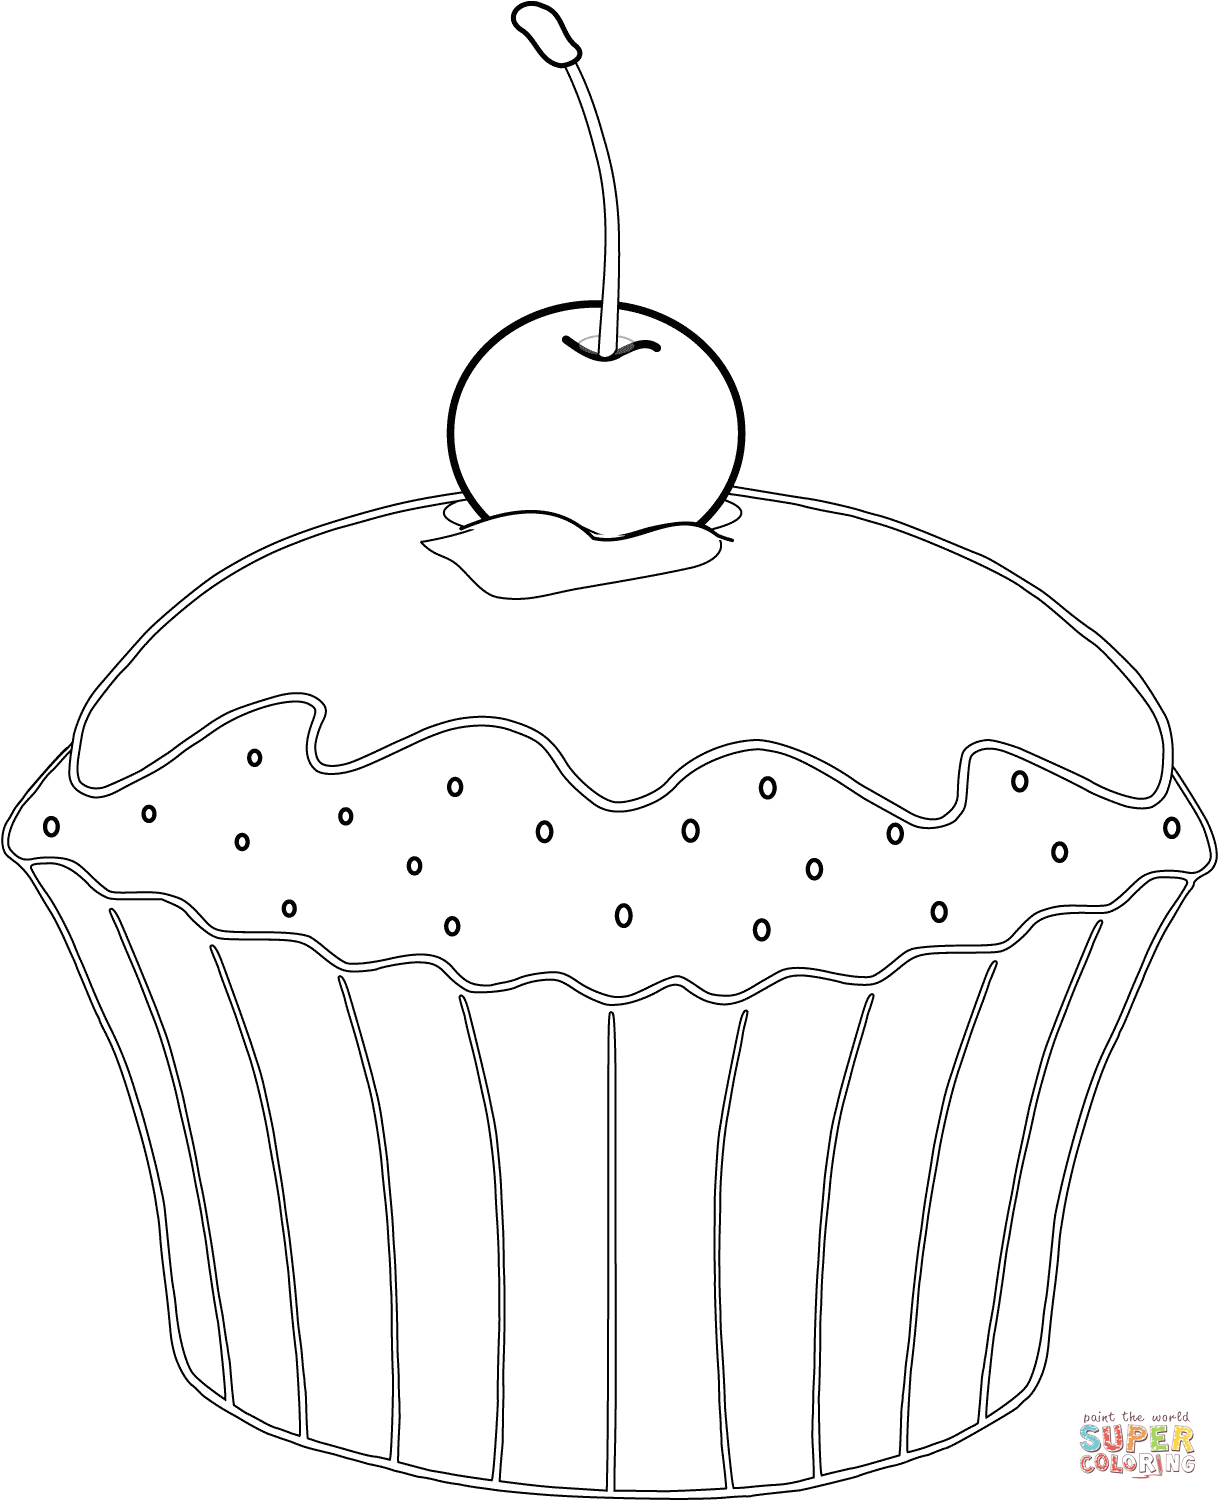 Muffin with Cherry coloring page